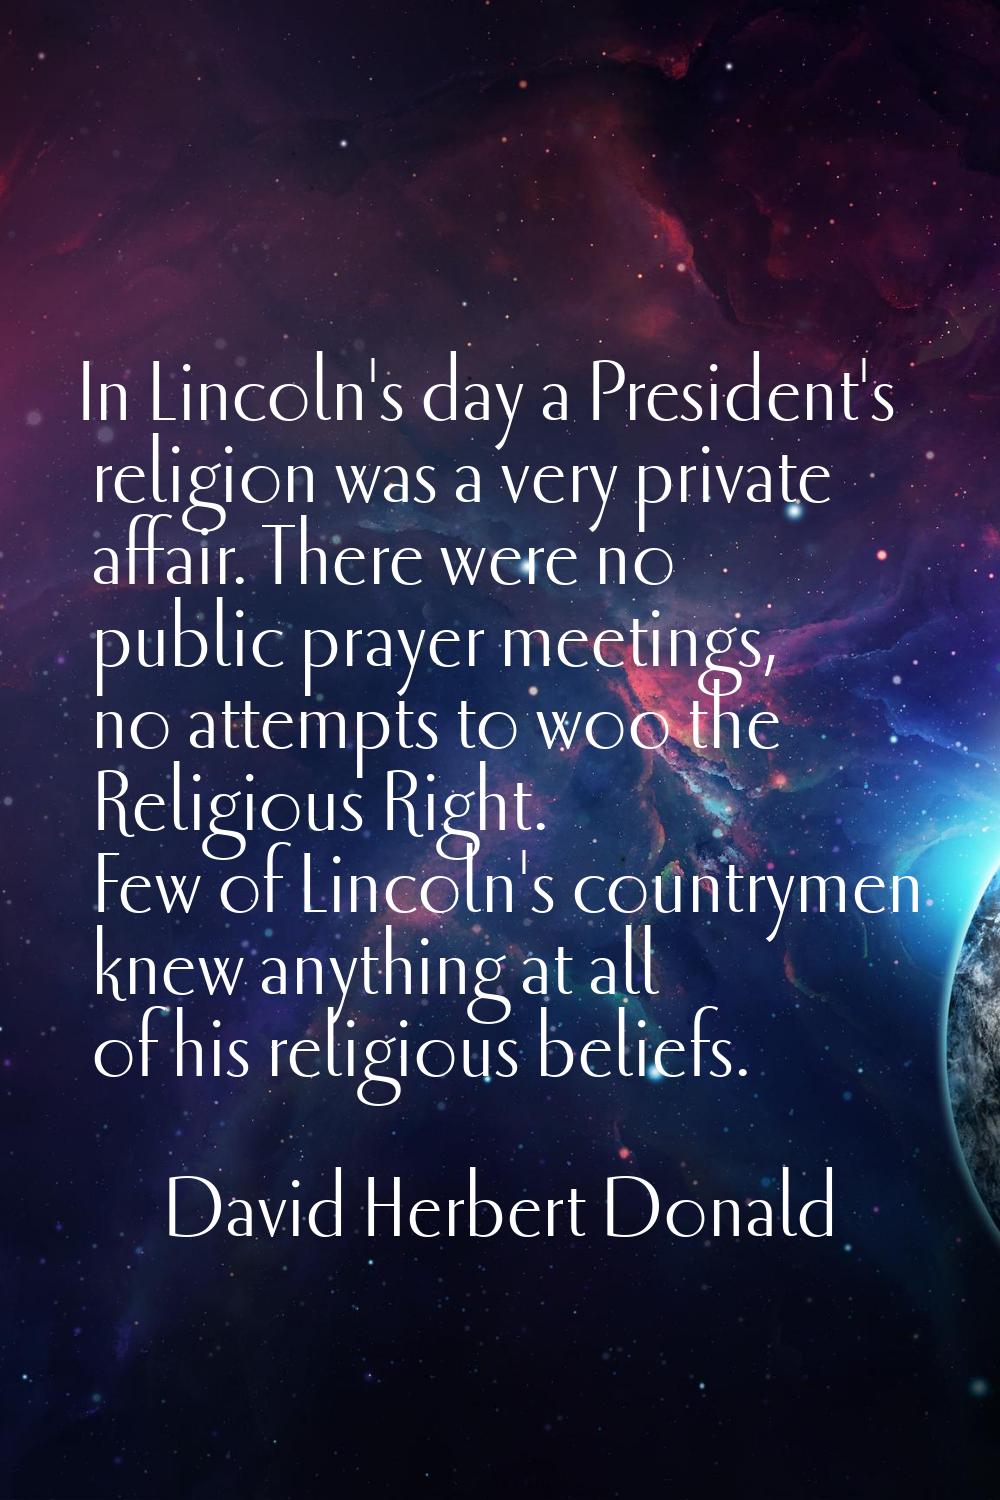 In Lincoln's day a President's religion was a very private affair. There were no public prayer meet